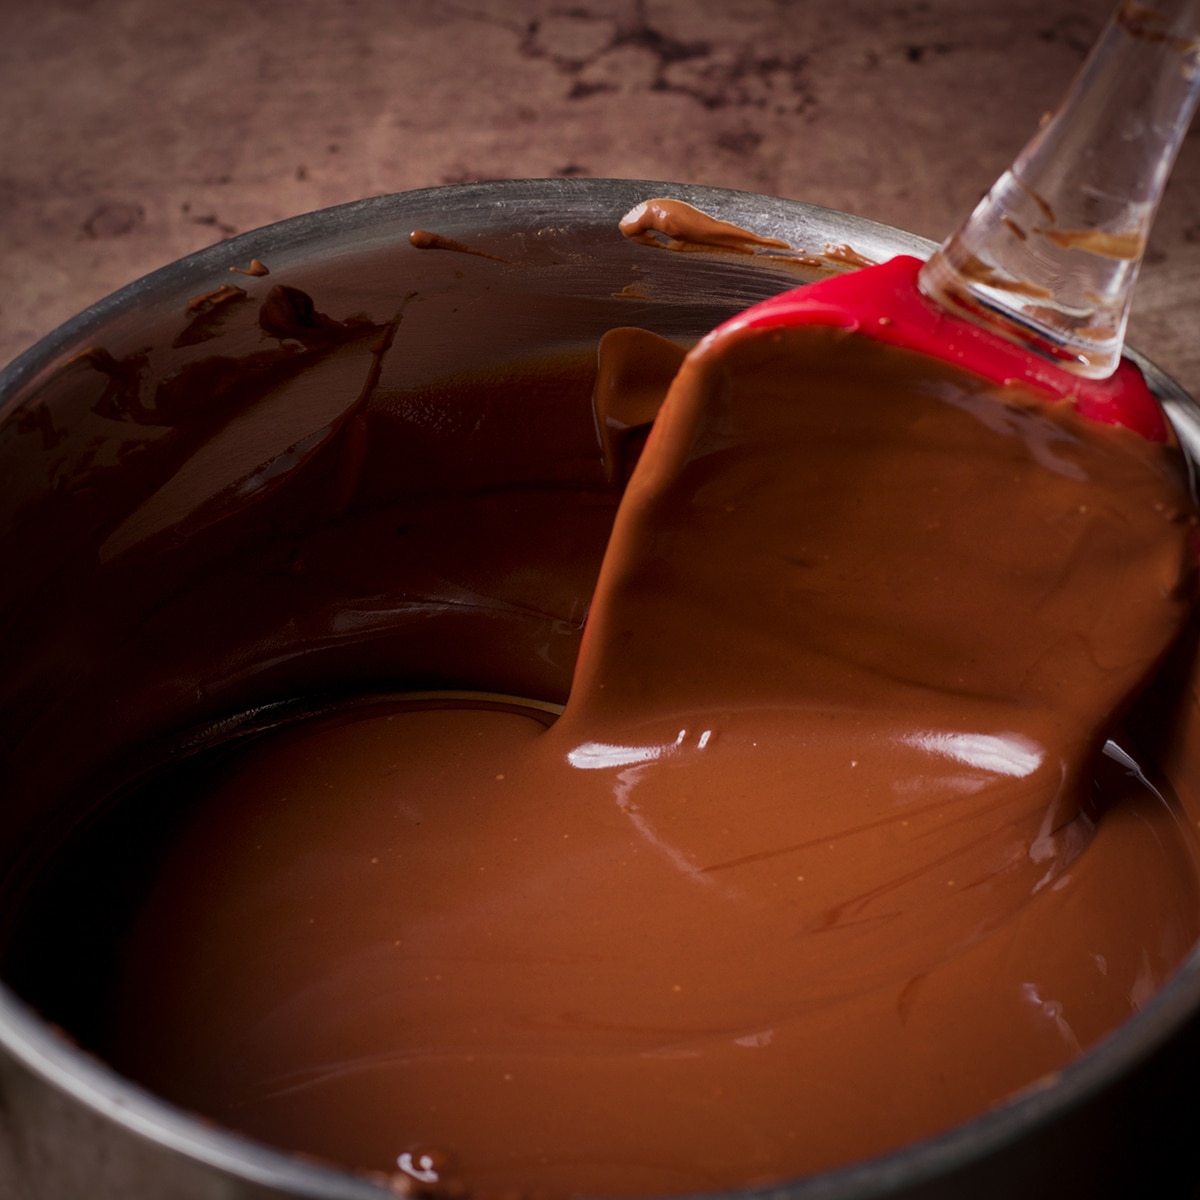 Someone using a rubber spatula to stir melted milk chocolate in a saucepan.